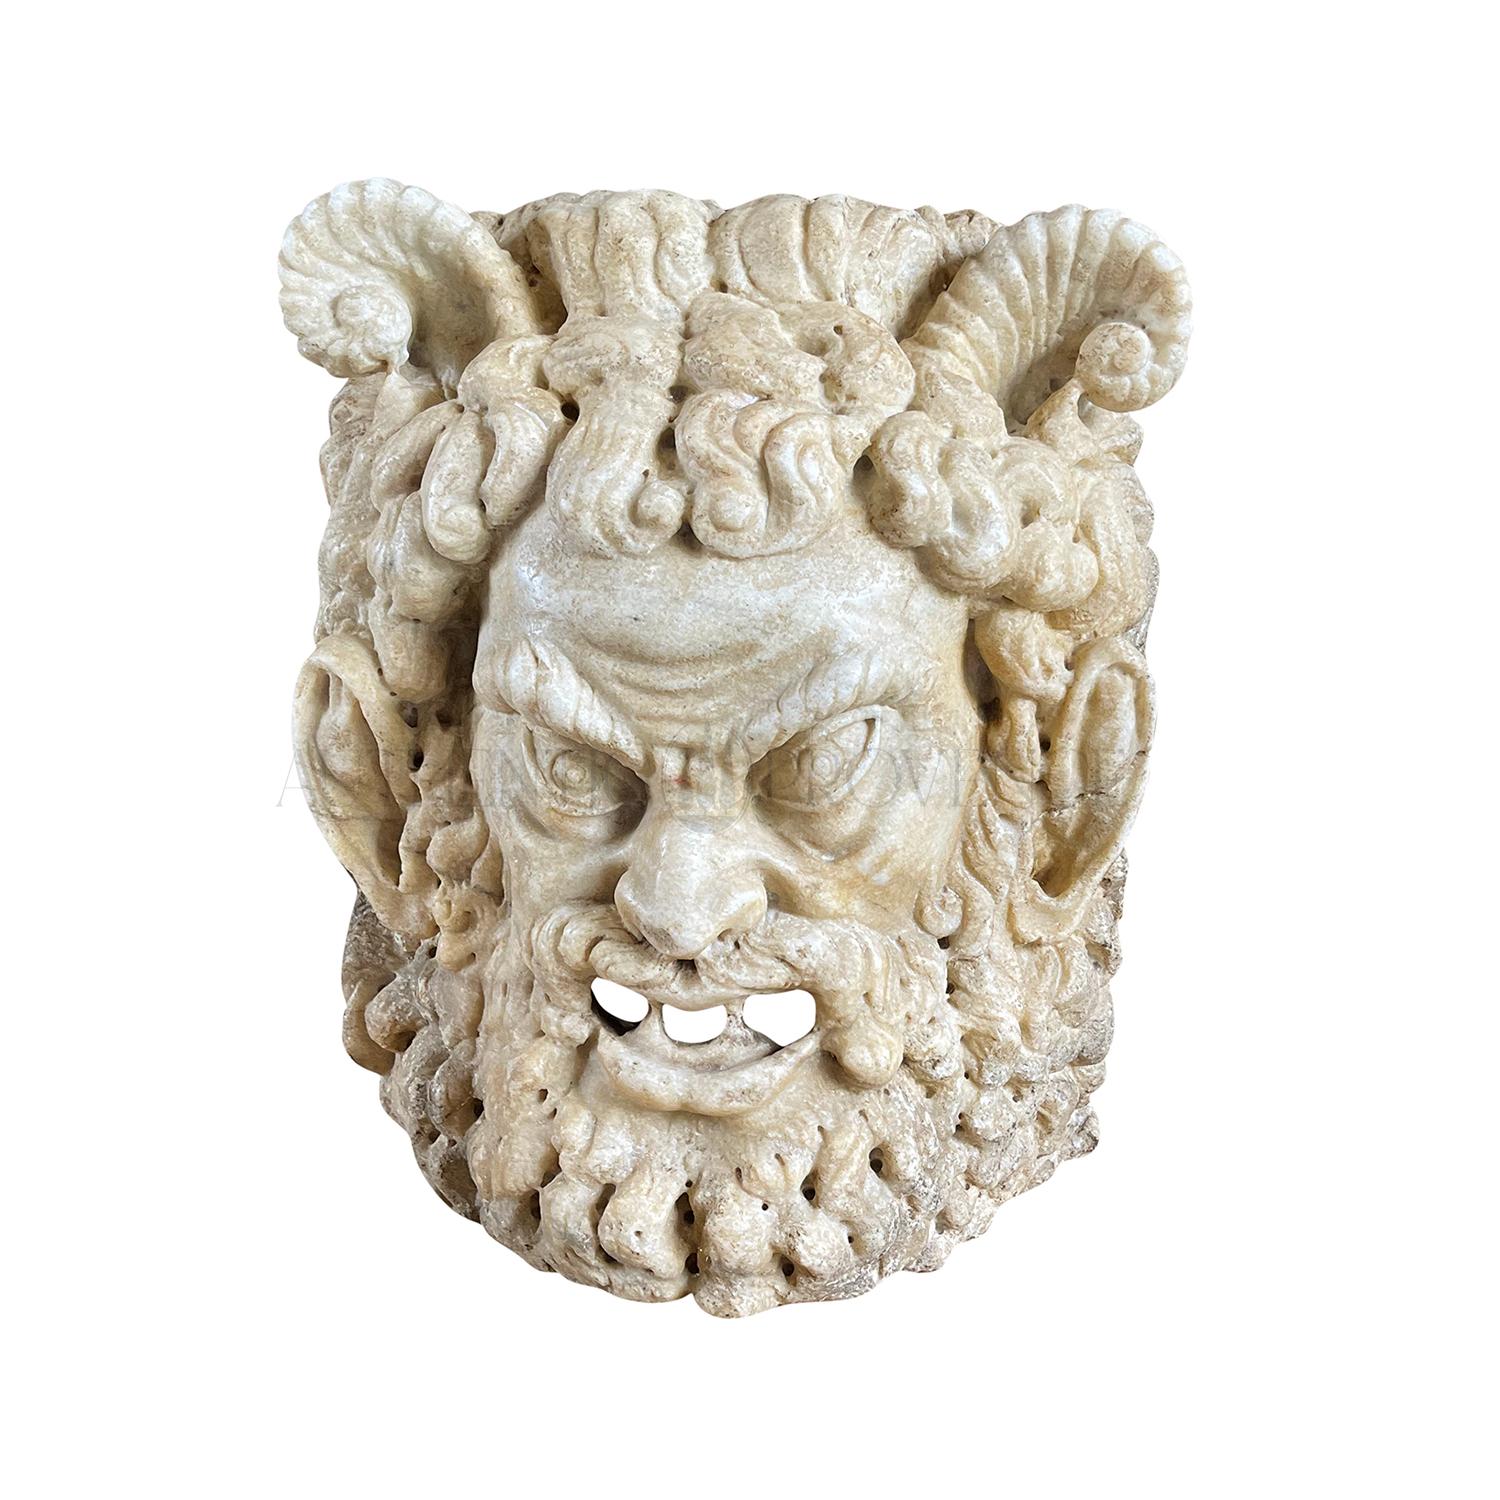 A hand carved late 18th/19th Century mythological marble Satyr mask with horns, weathered patina in good condition. The hand sculpted Italian Carrara marble wall mount fragment was carved in a very detailed manner. Wear consistent with age and use.